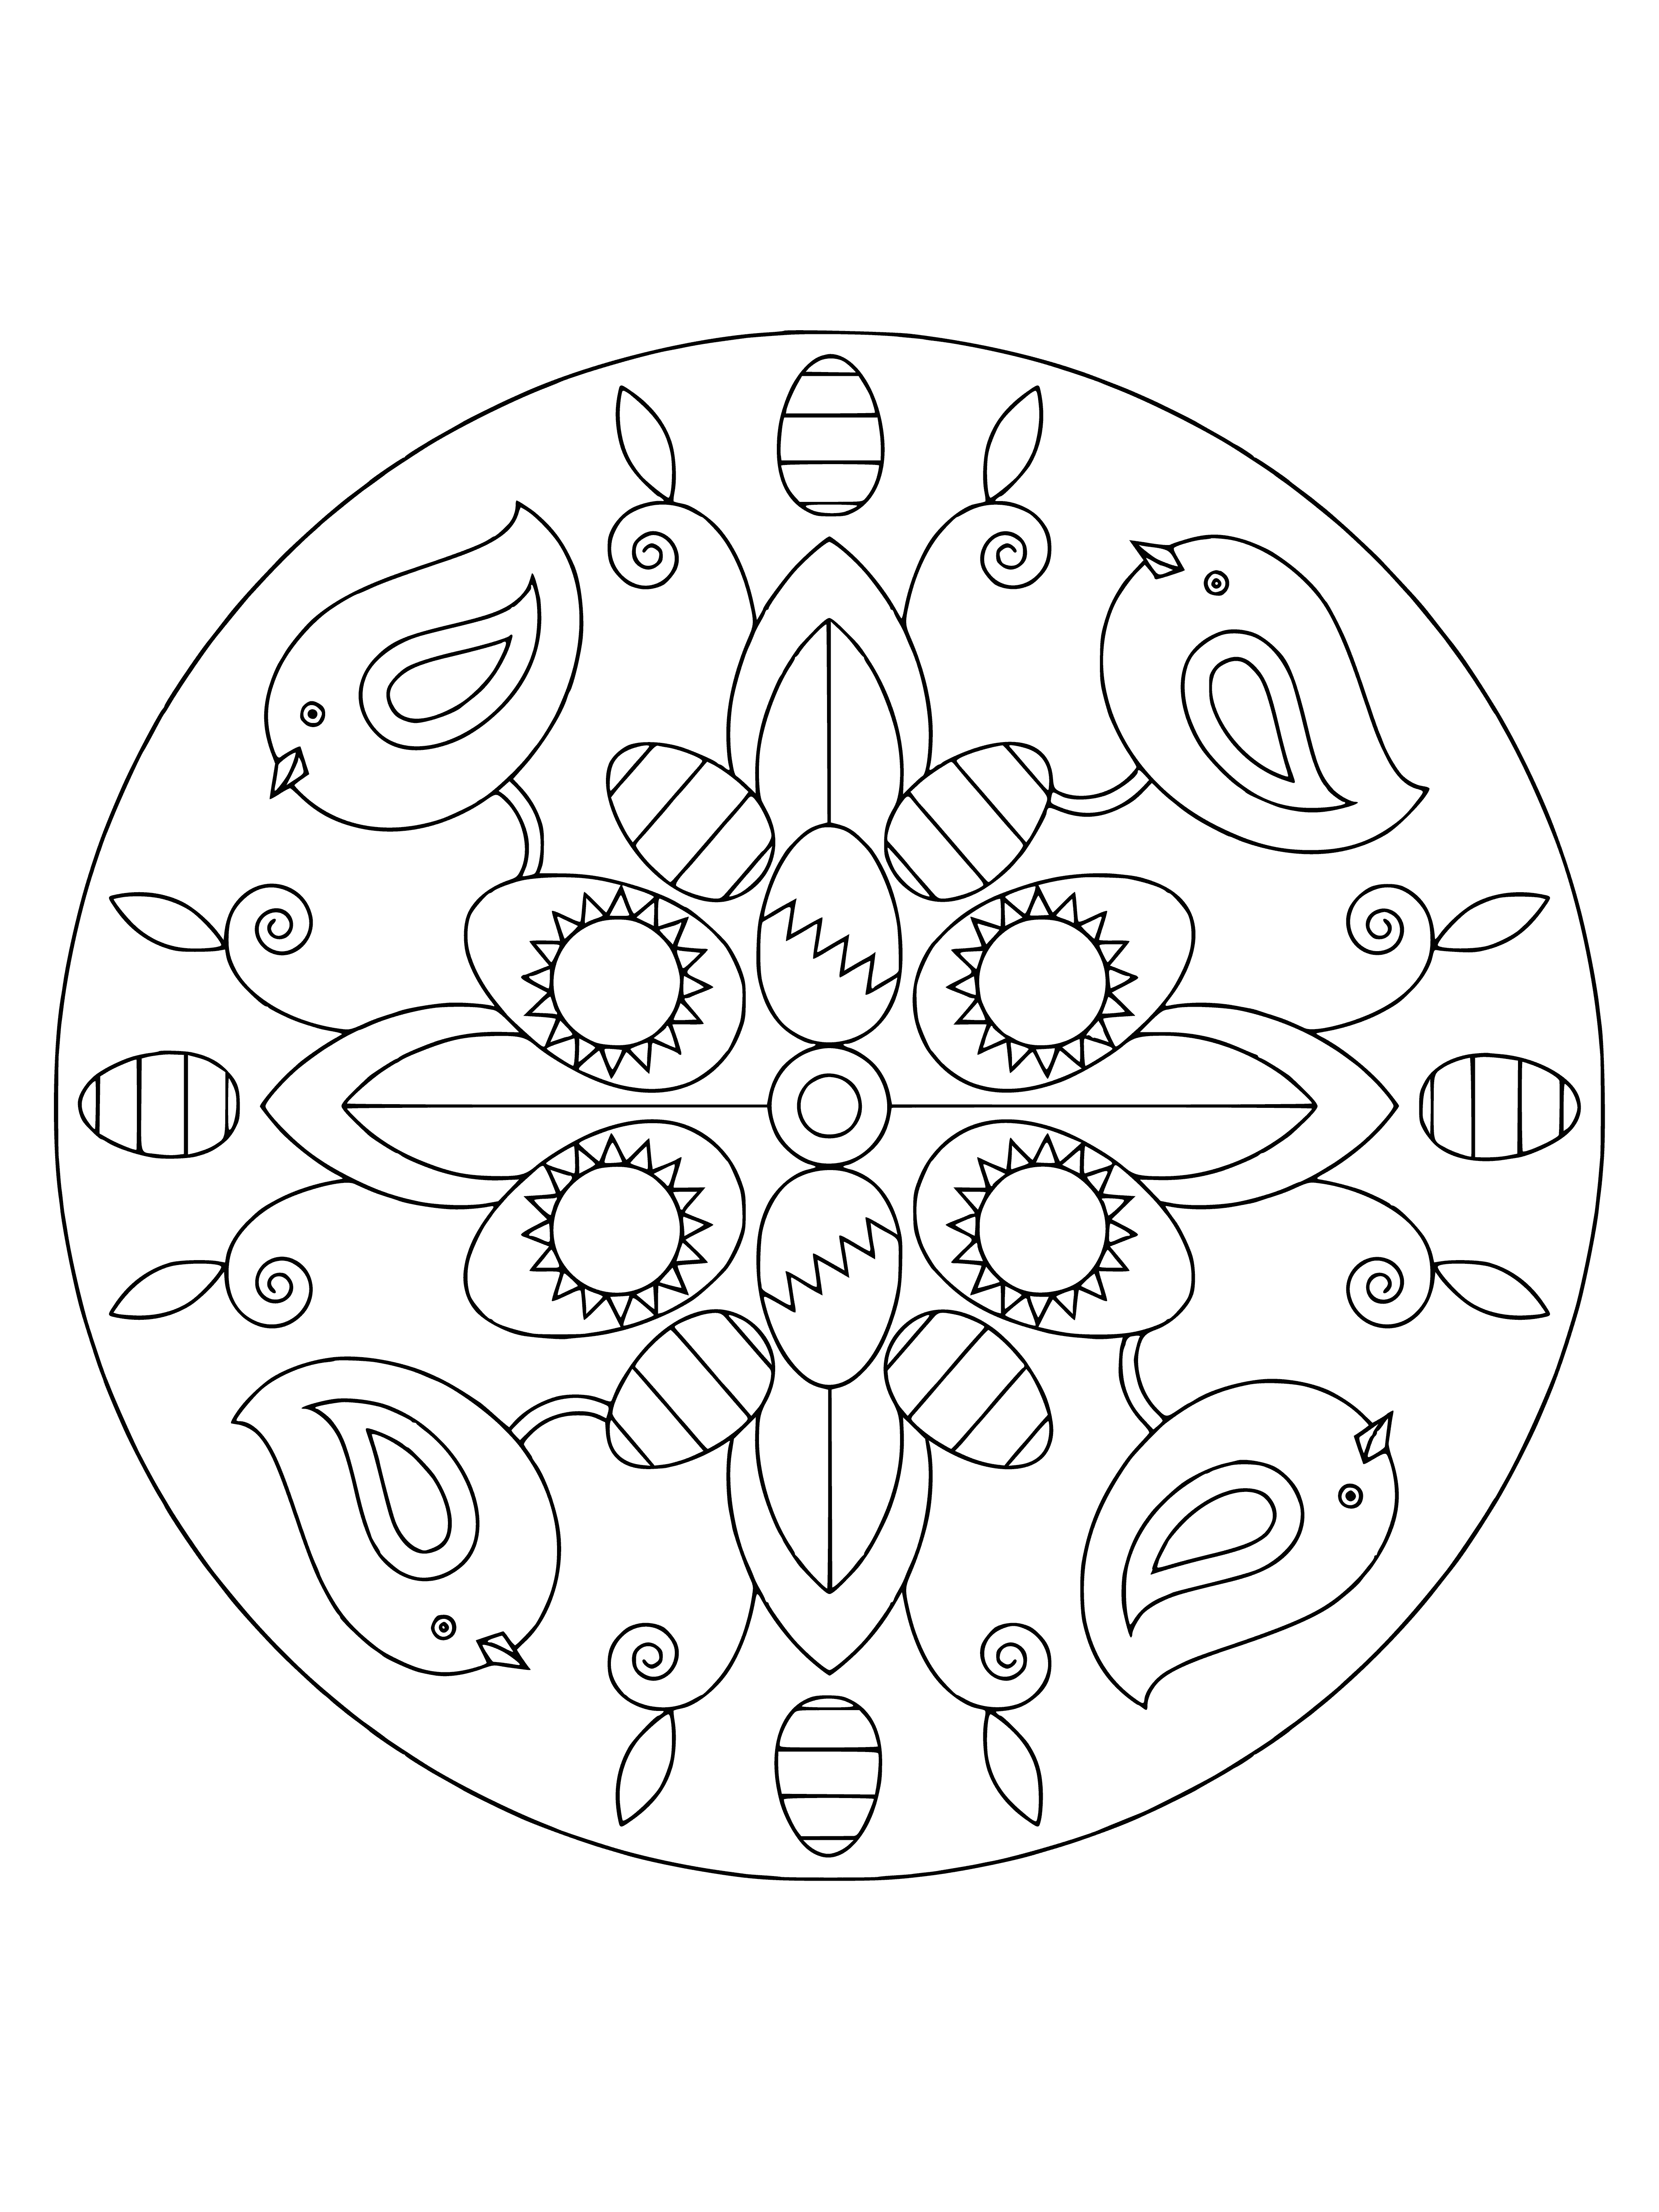 coloring page: Celebrate Easter by coloring this mandala featuring a bunny in the center surrounded by flowers & eggs! A fun meditative tool used in Eastern religions.